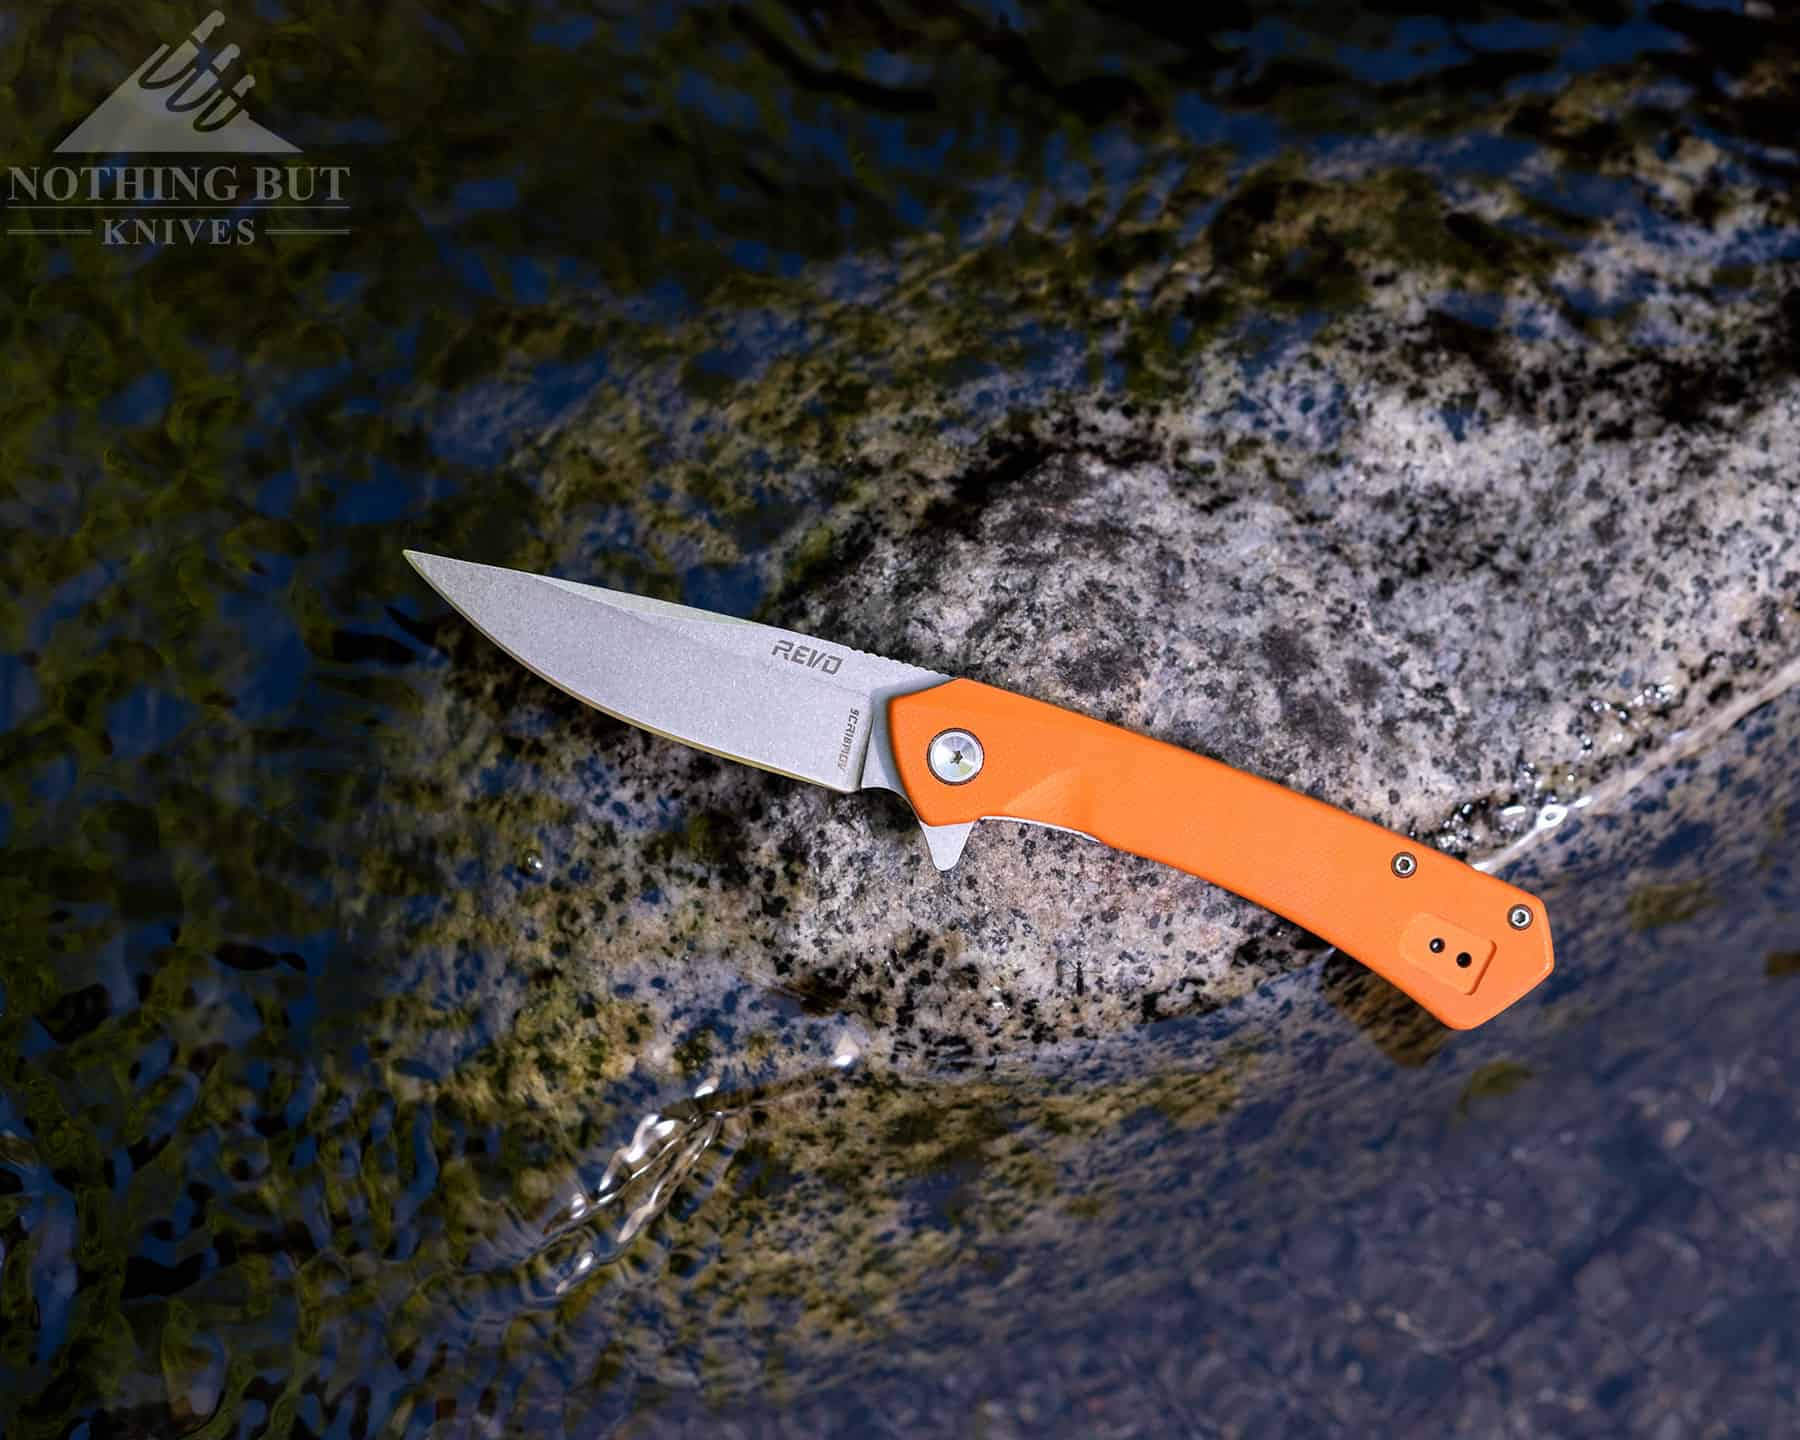 The Revo Warden 2 features a 9Cr18MoV steel blade.